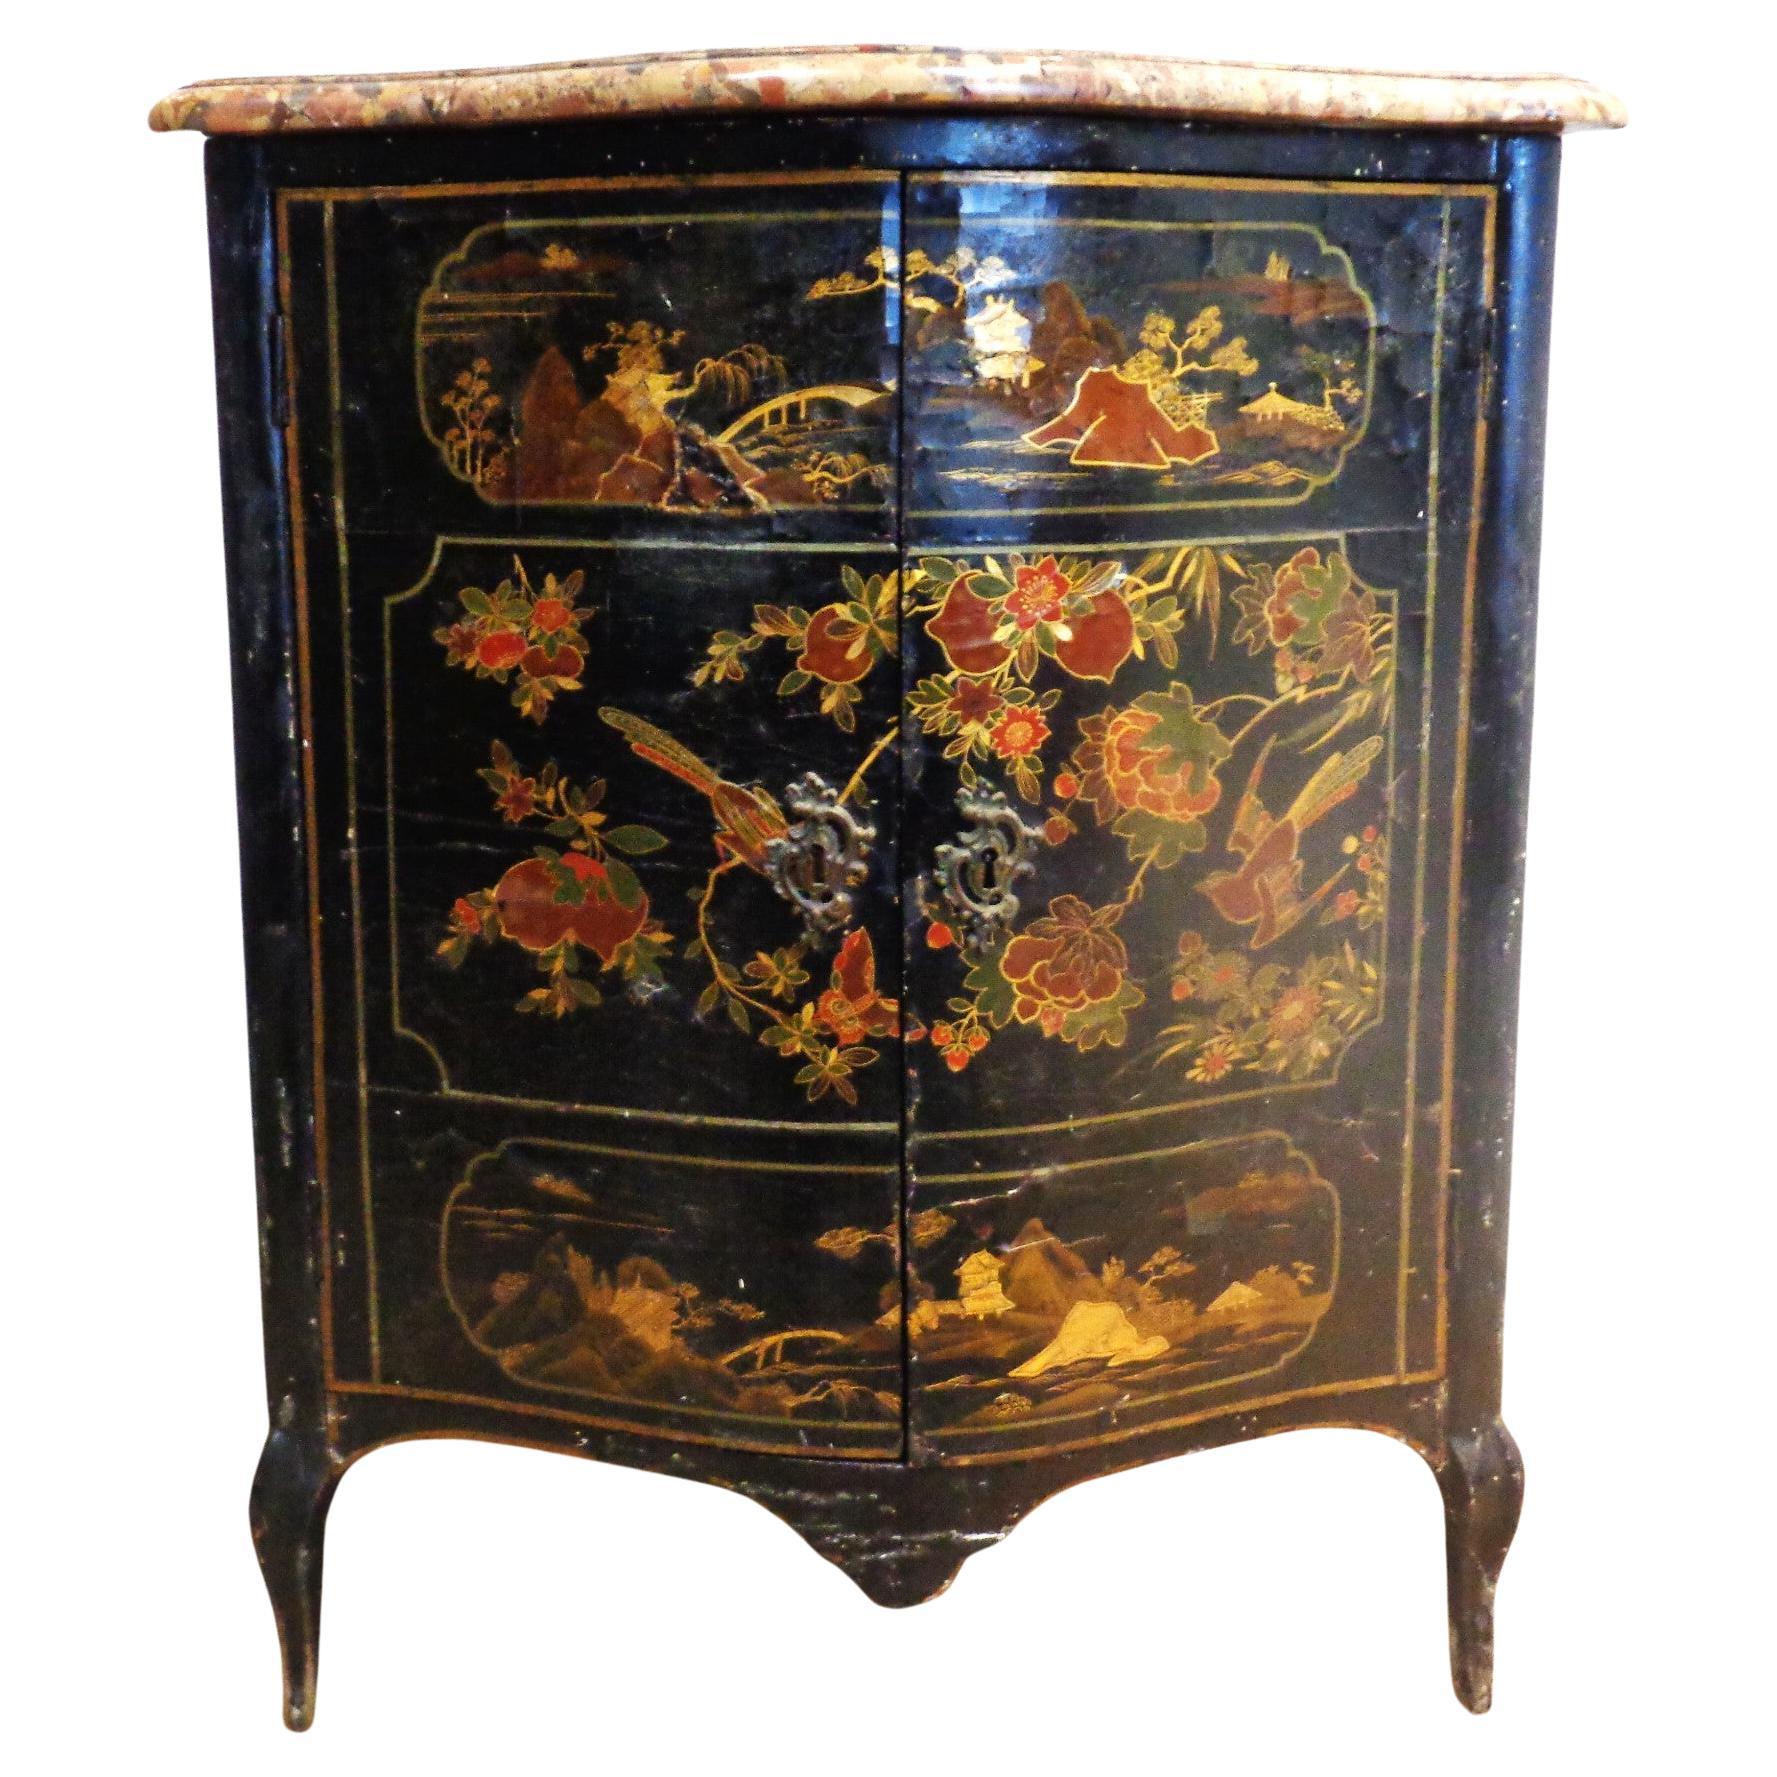  18th Century Louis XV Lacquered Chinoiserie Decorated Corner Cabinet